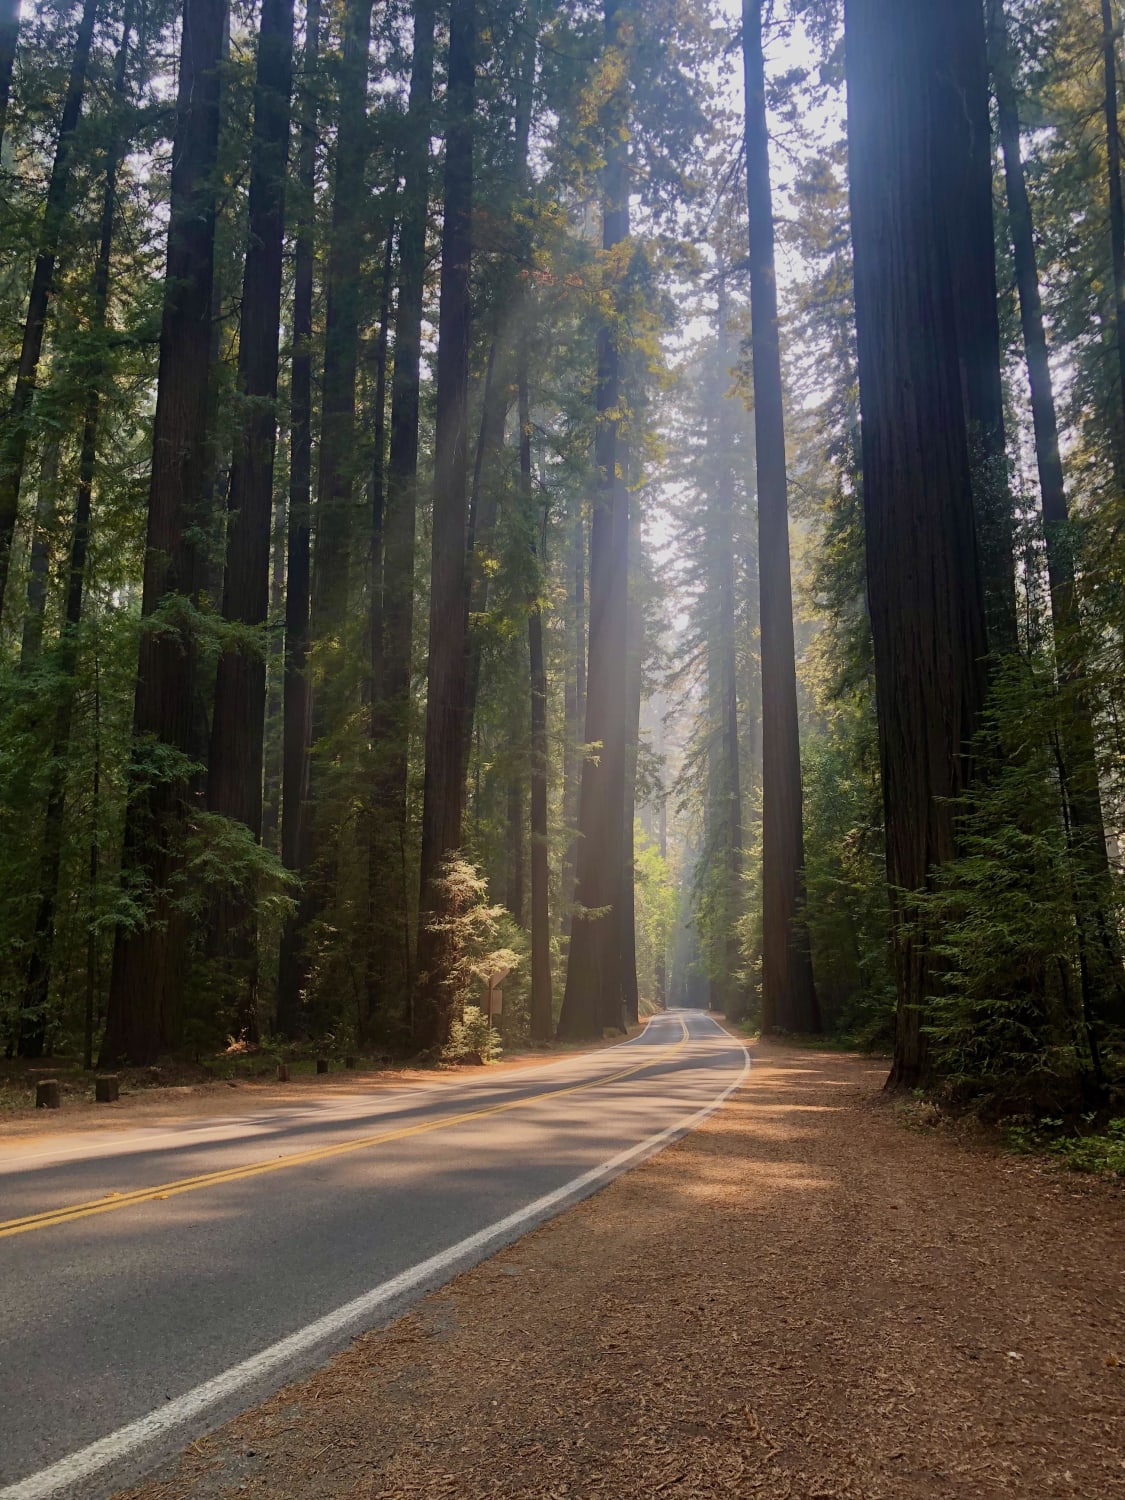 ITAP in the Avenue of the Giants, CA